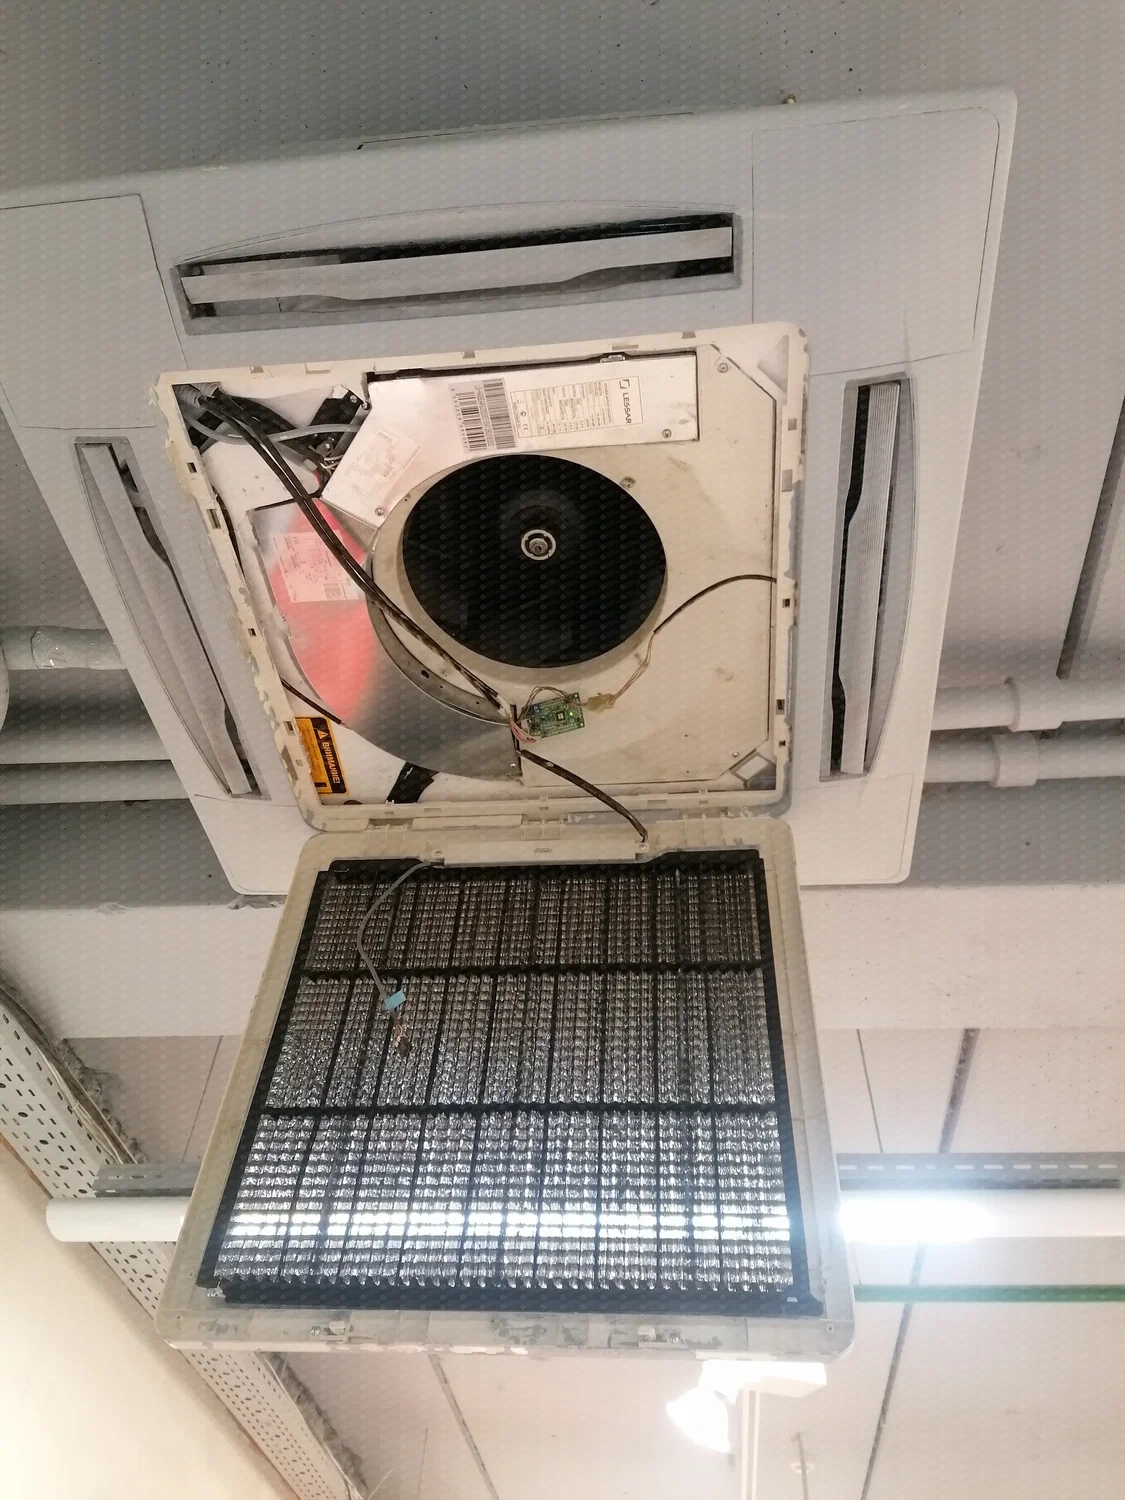 Prevention of a cassette air conditioner (under warranty)